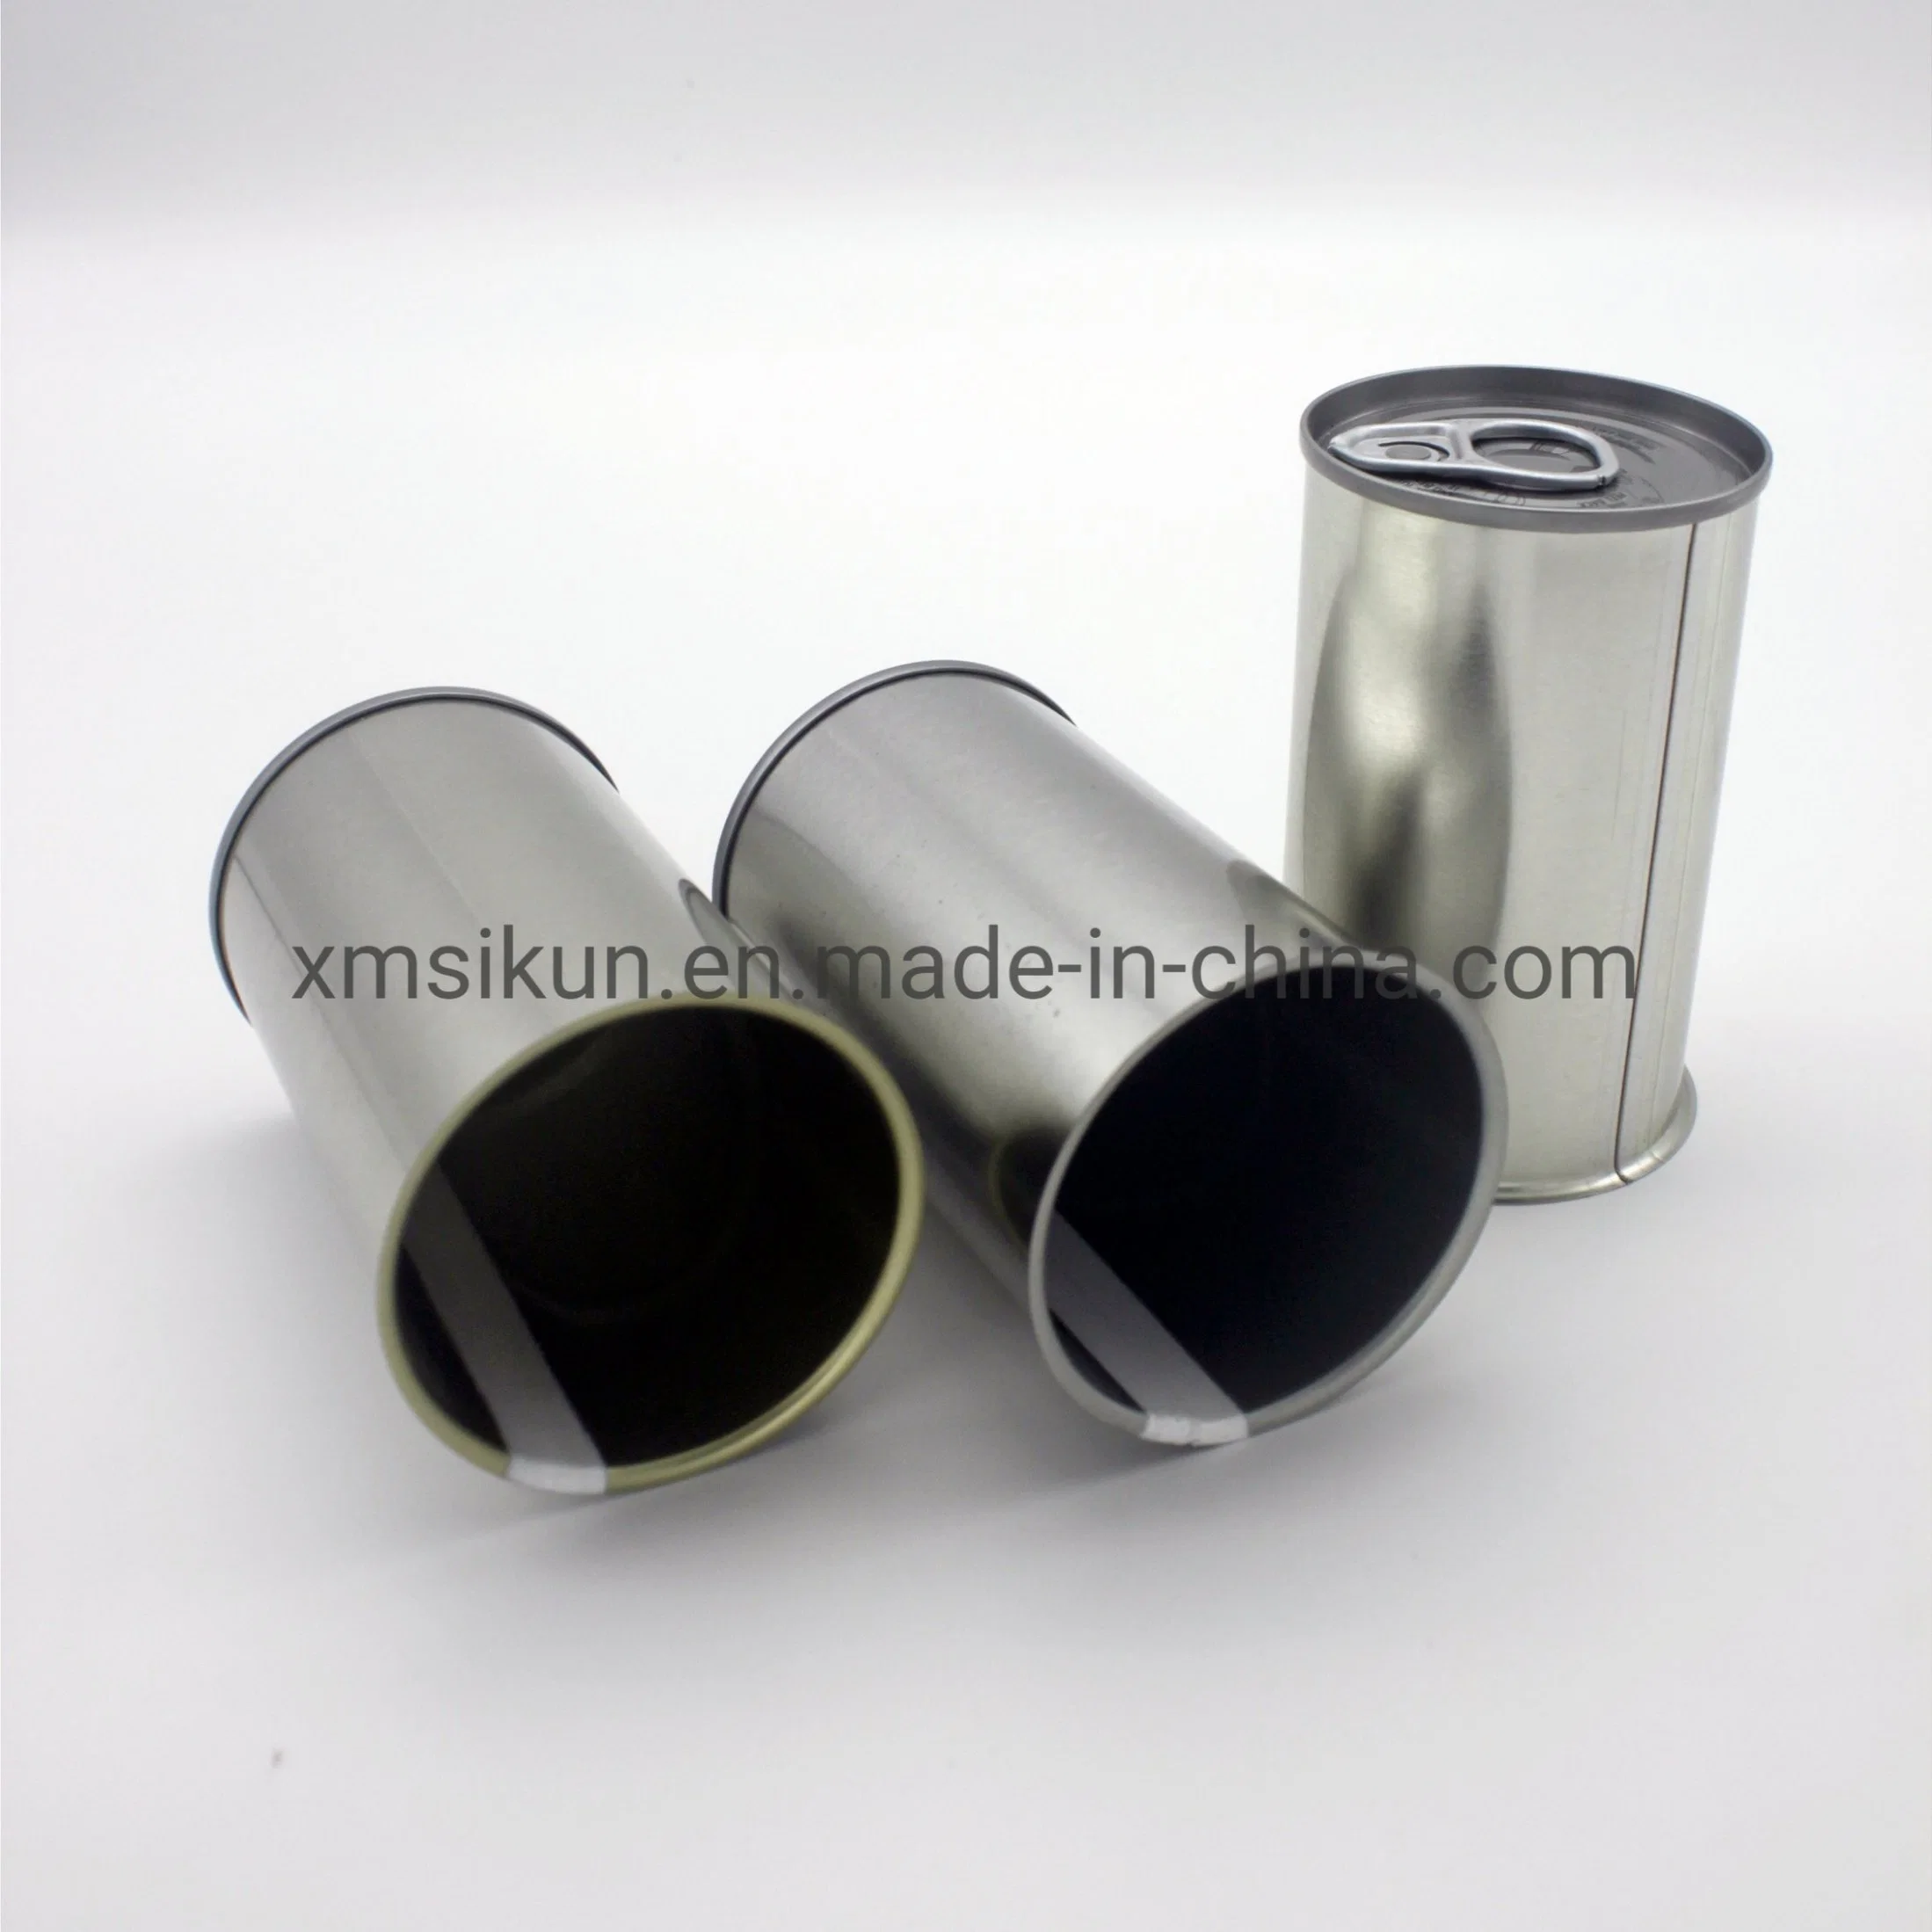 588# Manufacturers of Large Quantities of Multi-Type Promotional Food-Grade Tin Can Packaging